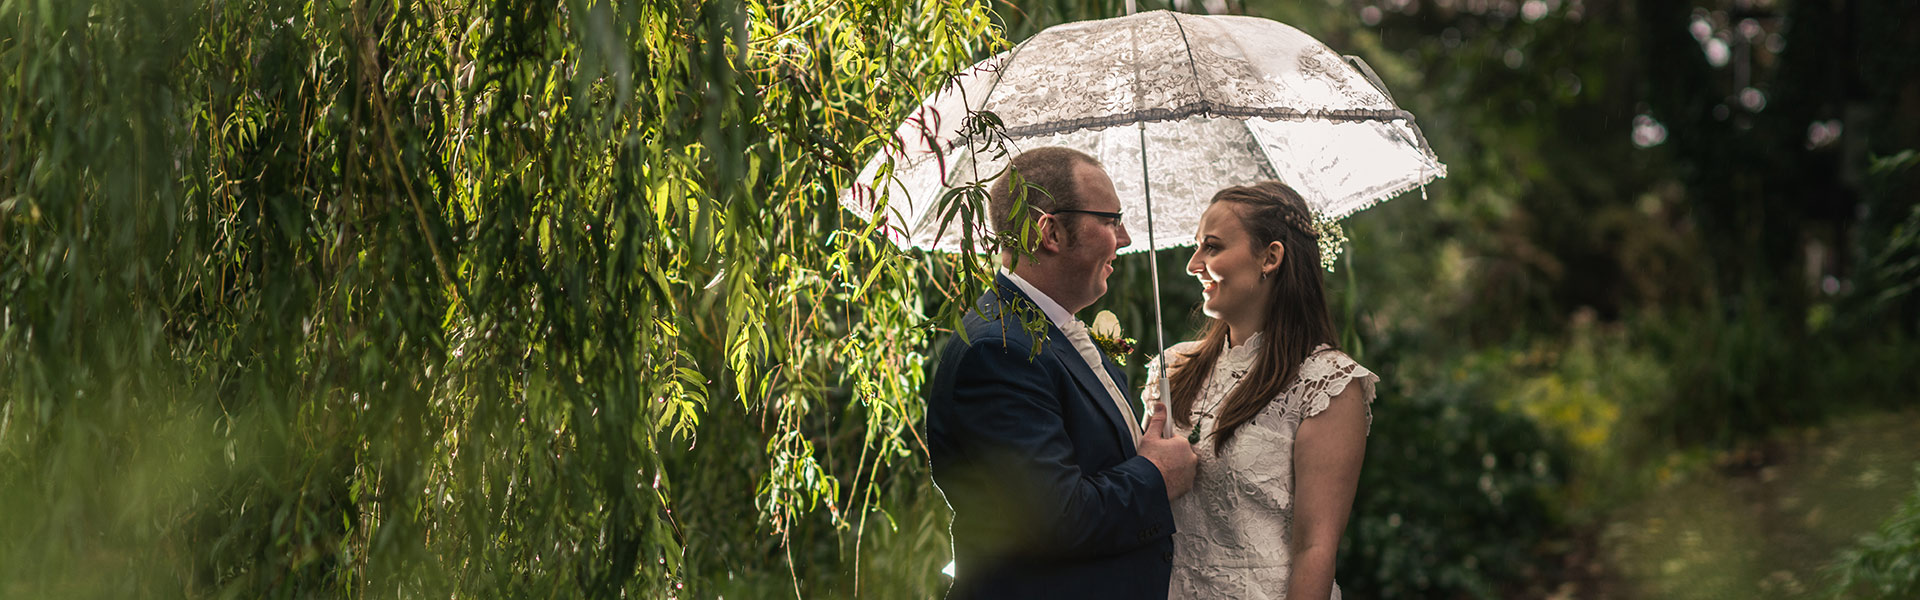 How to nail a wet wedding!